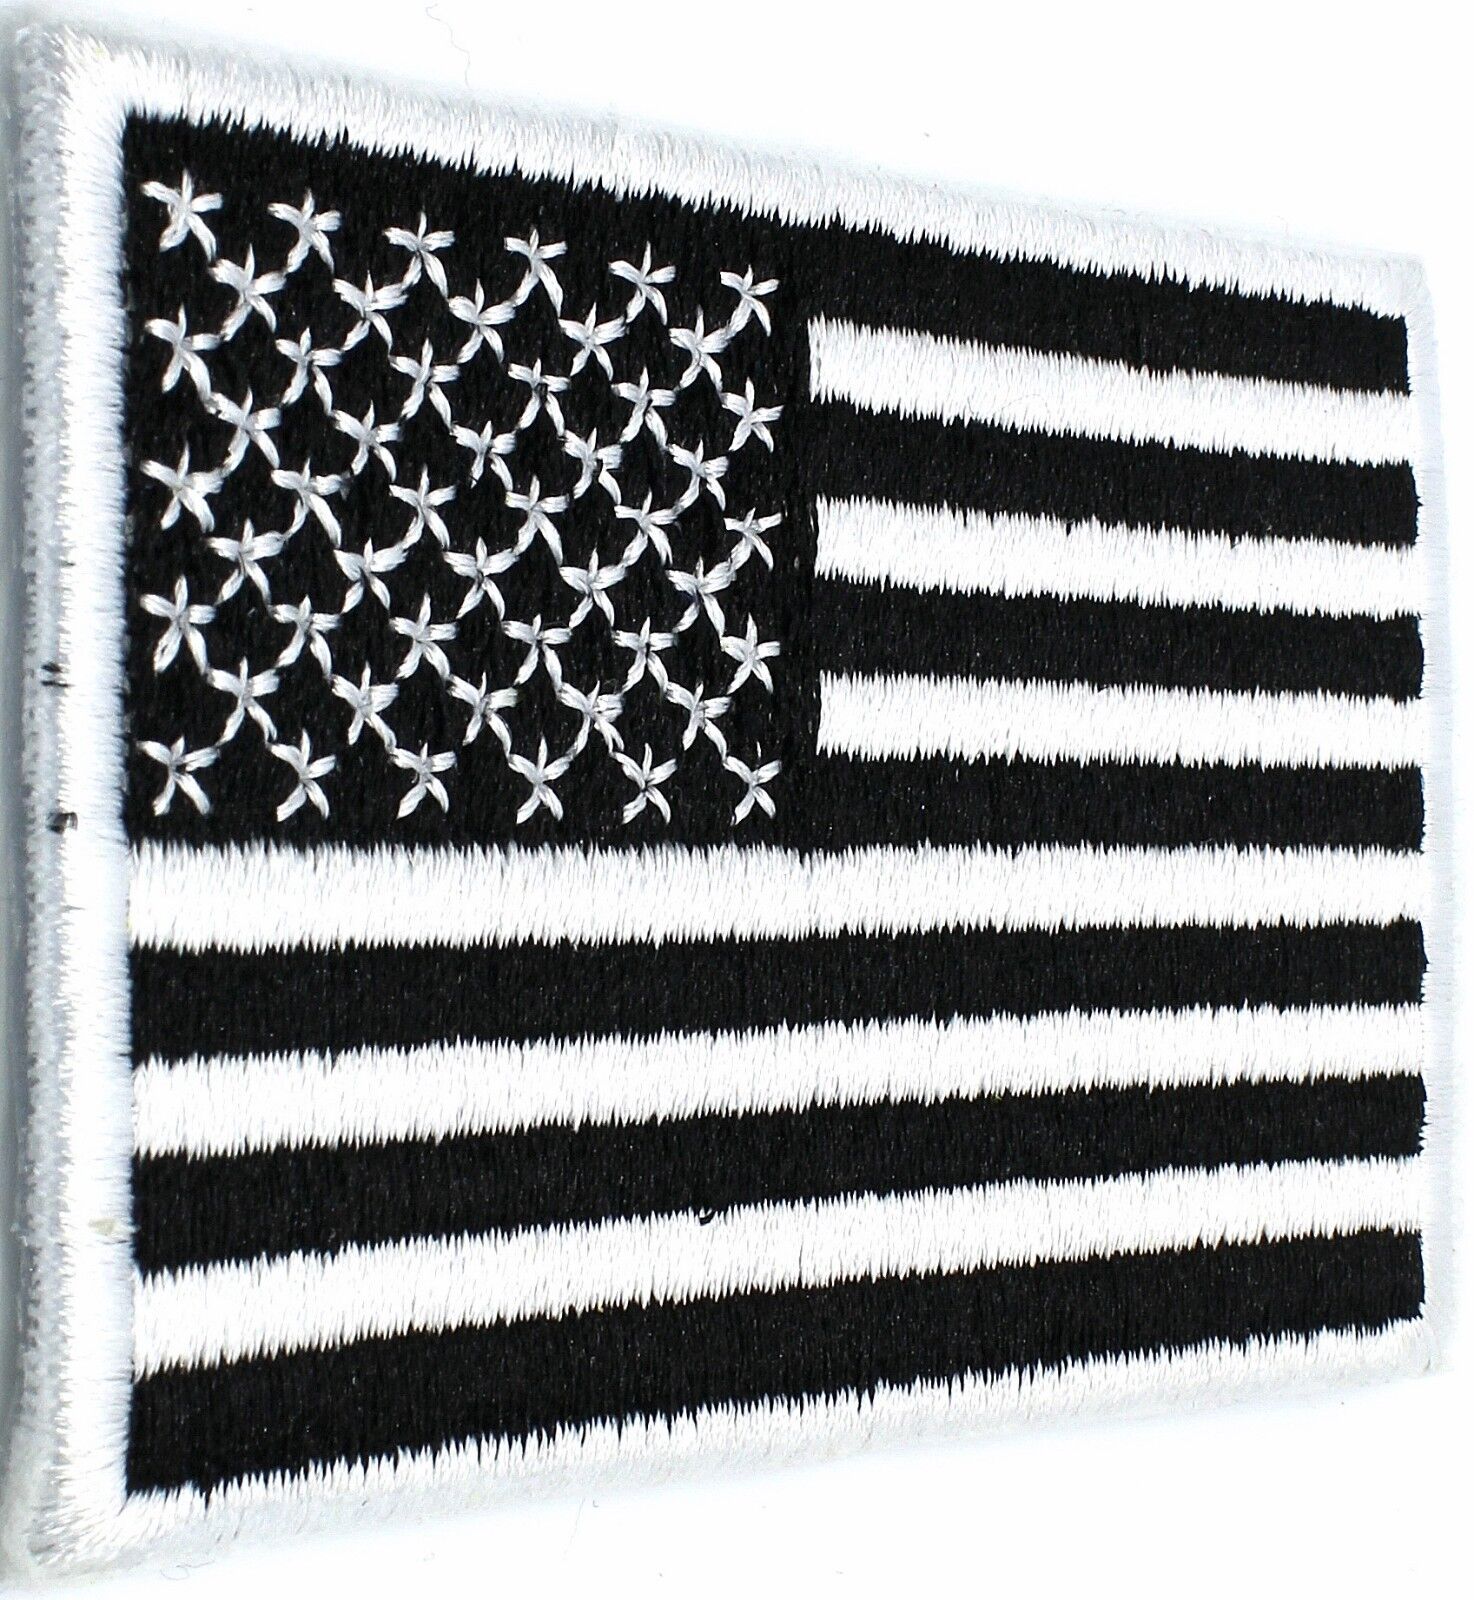 USA AMERICAN FLAG TACTICAL US MORALE MILITARY BLACK IRON-ON PATCH AFI-3